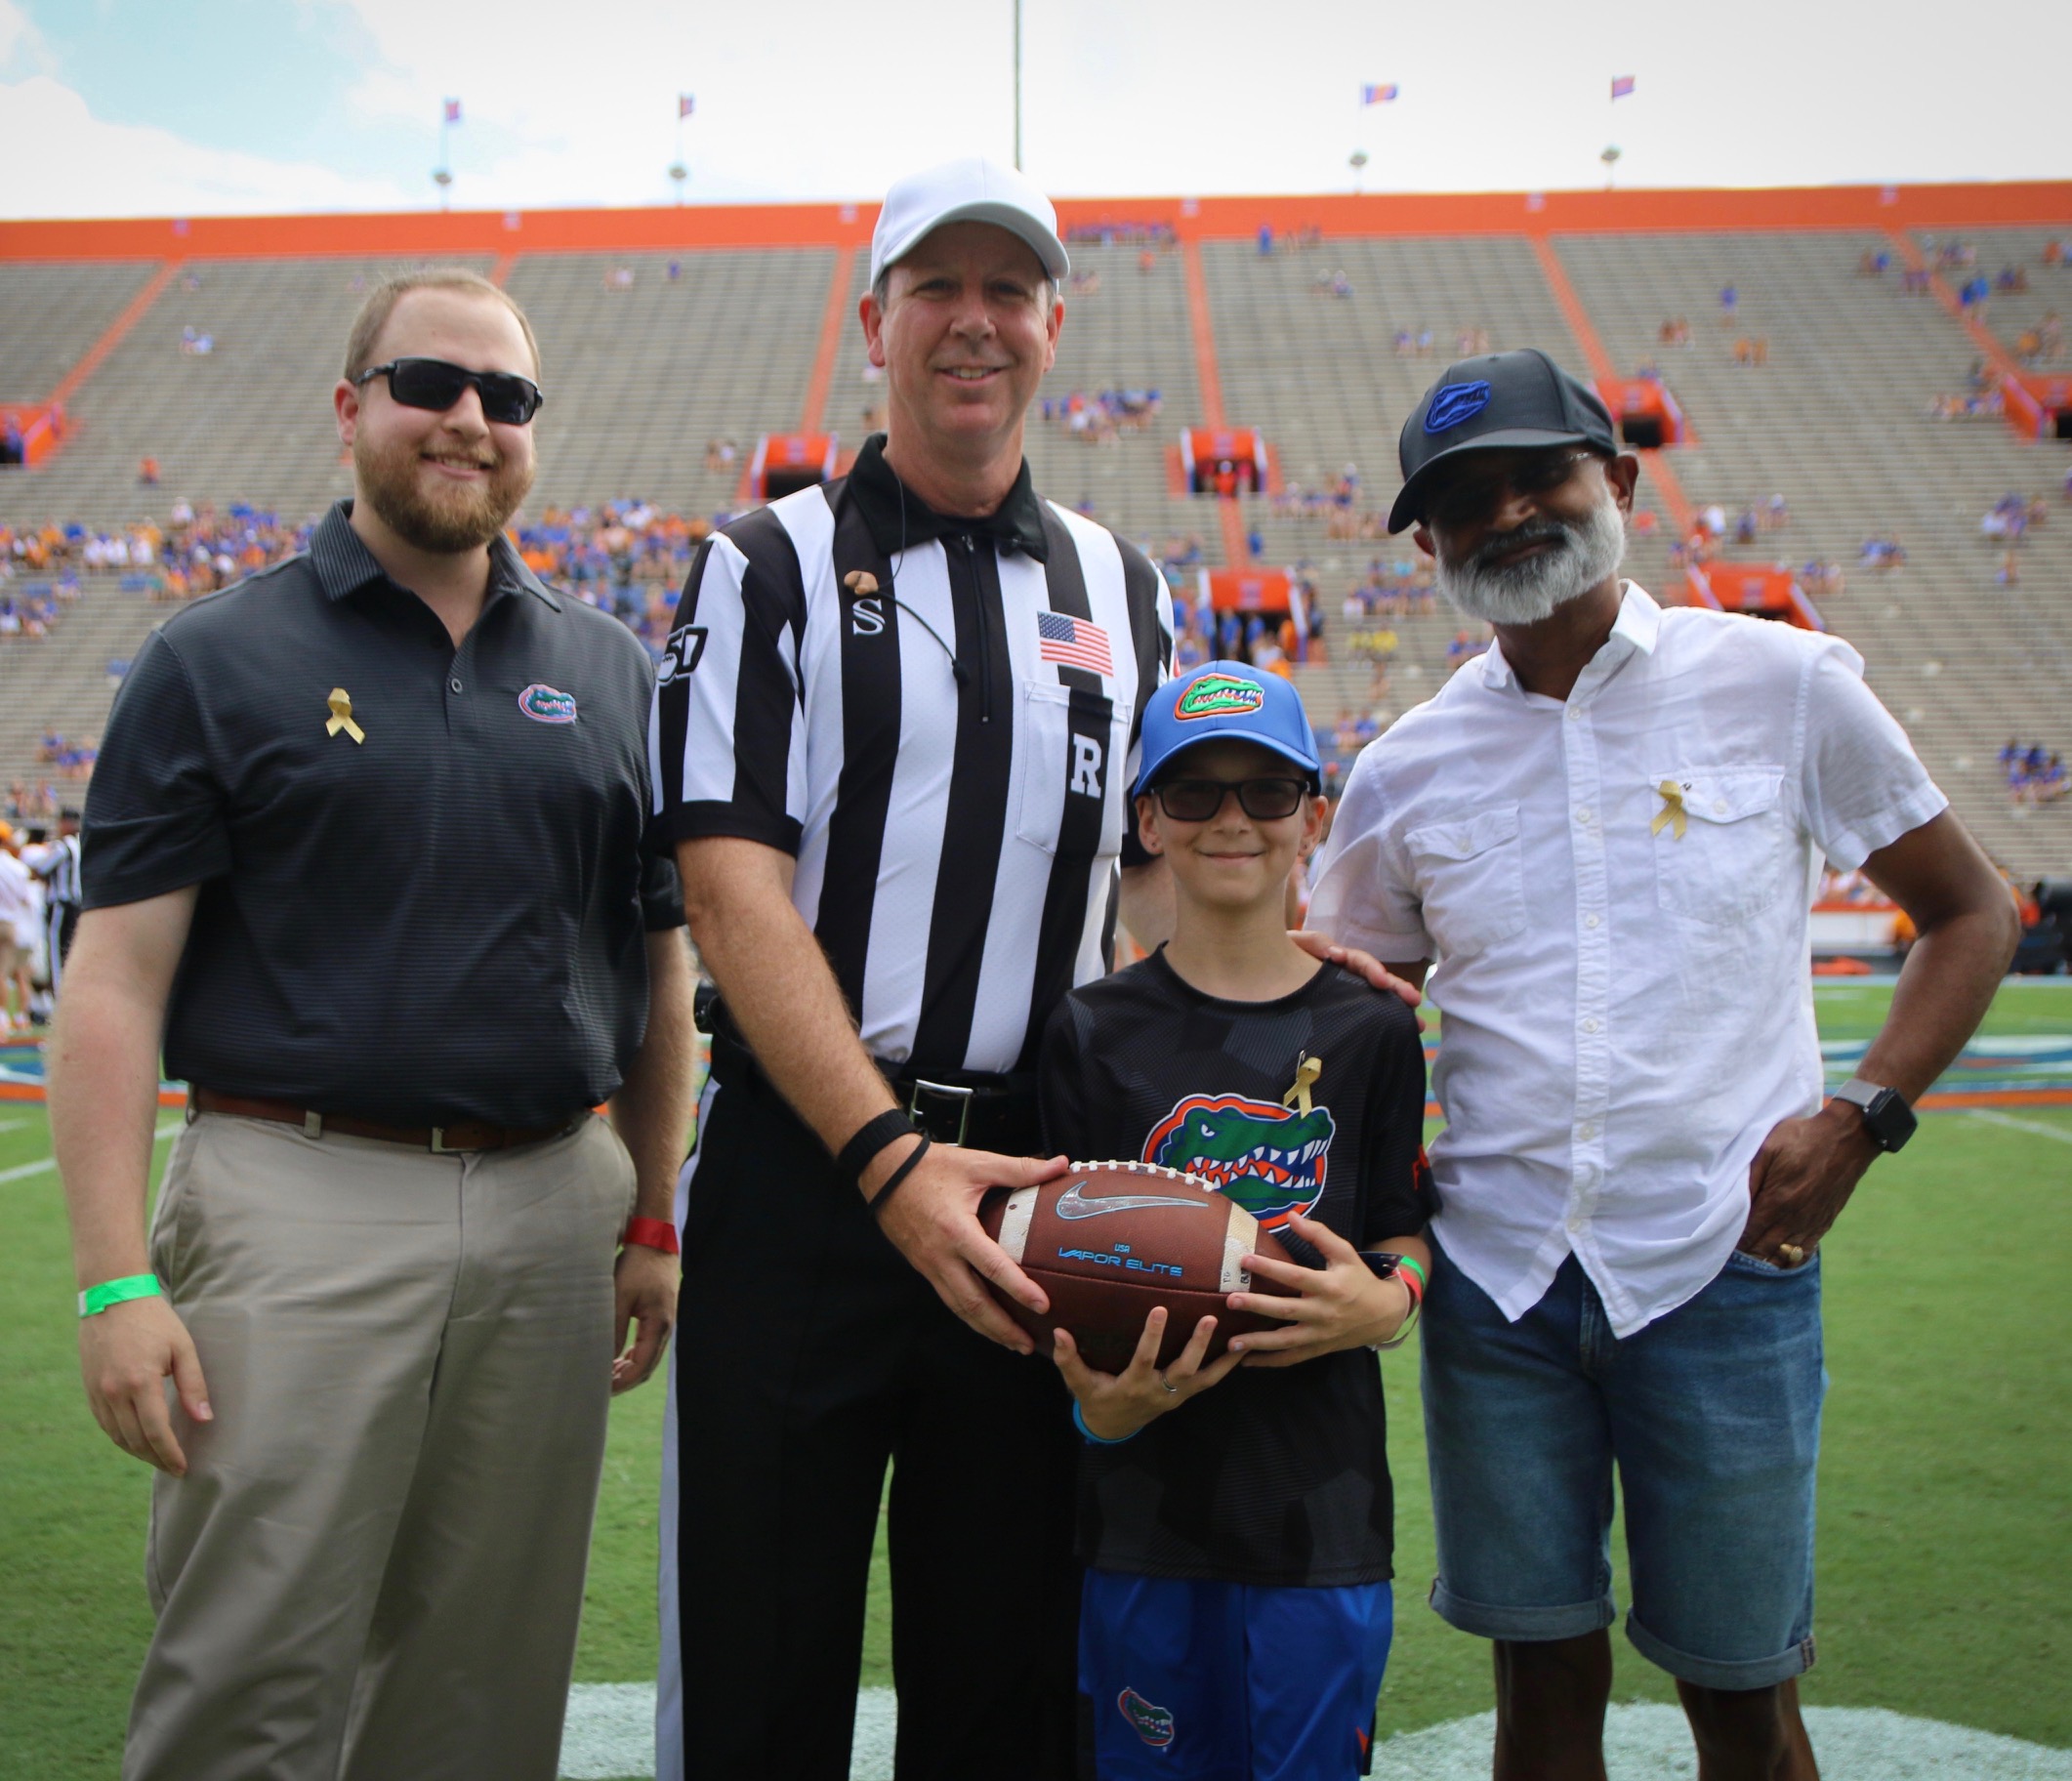 Mikah with the game ball, his doctor and a referee in The Swamp